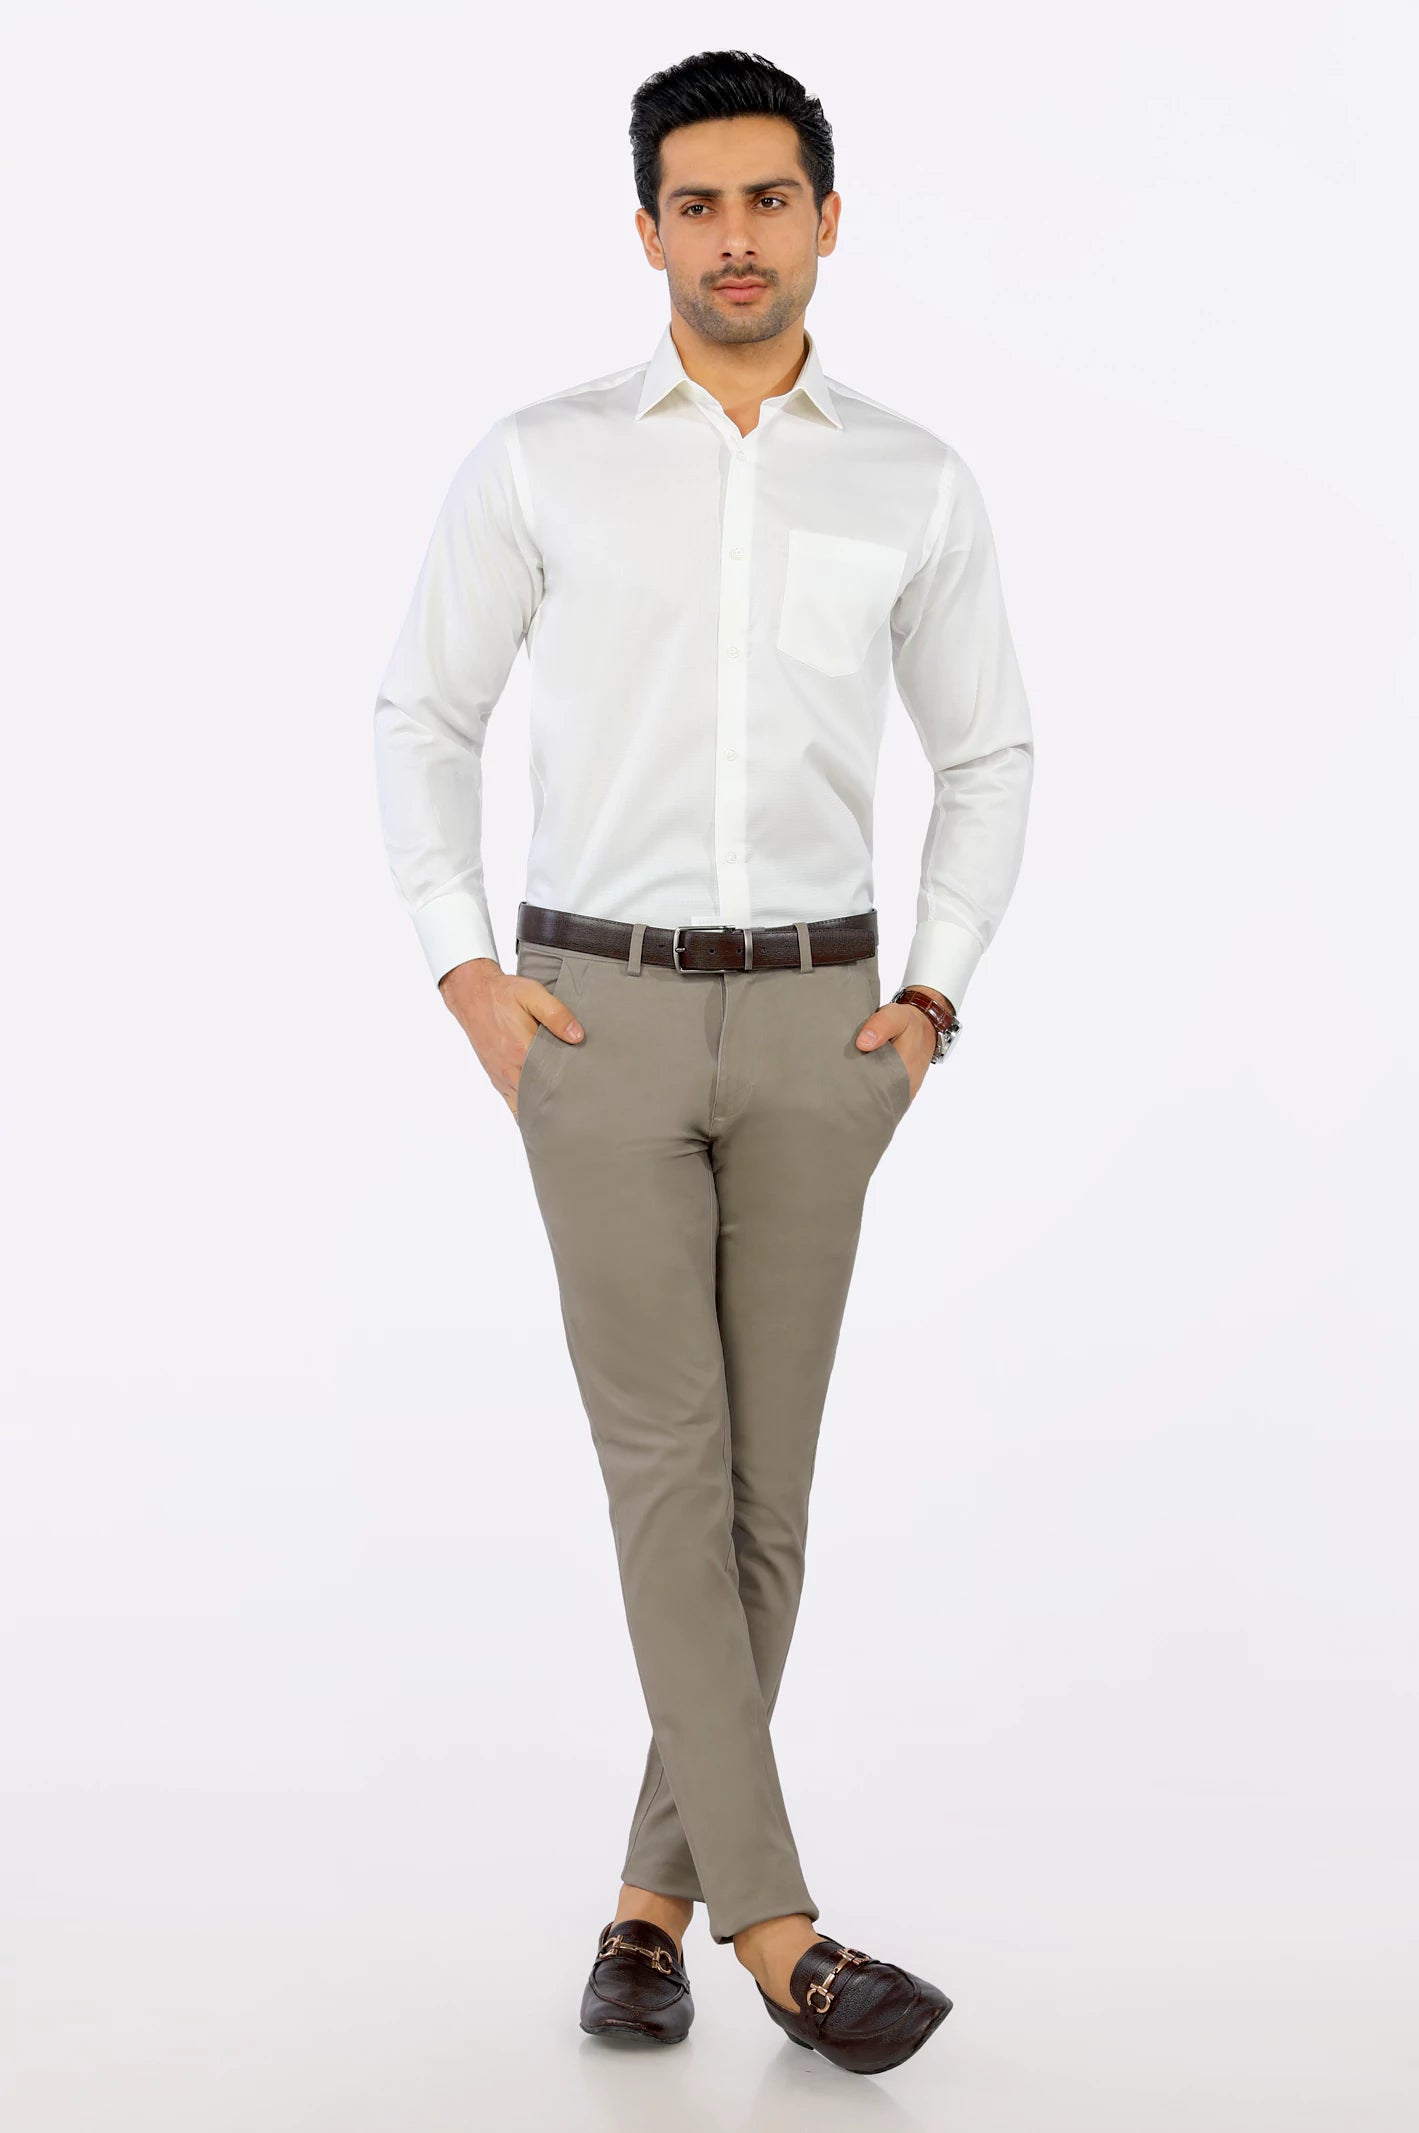 Off White Self Textured Formal Shirt From Diners